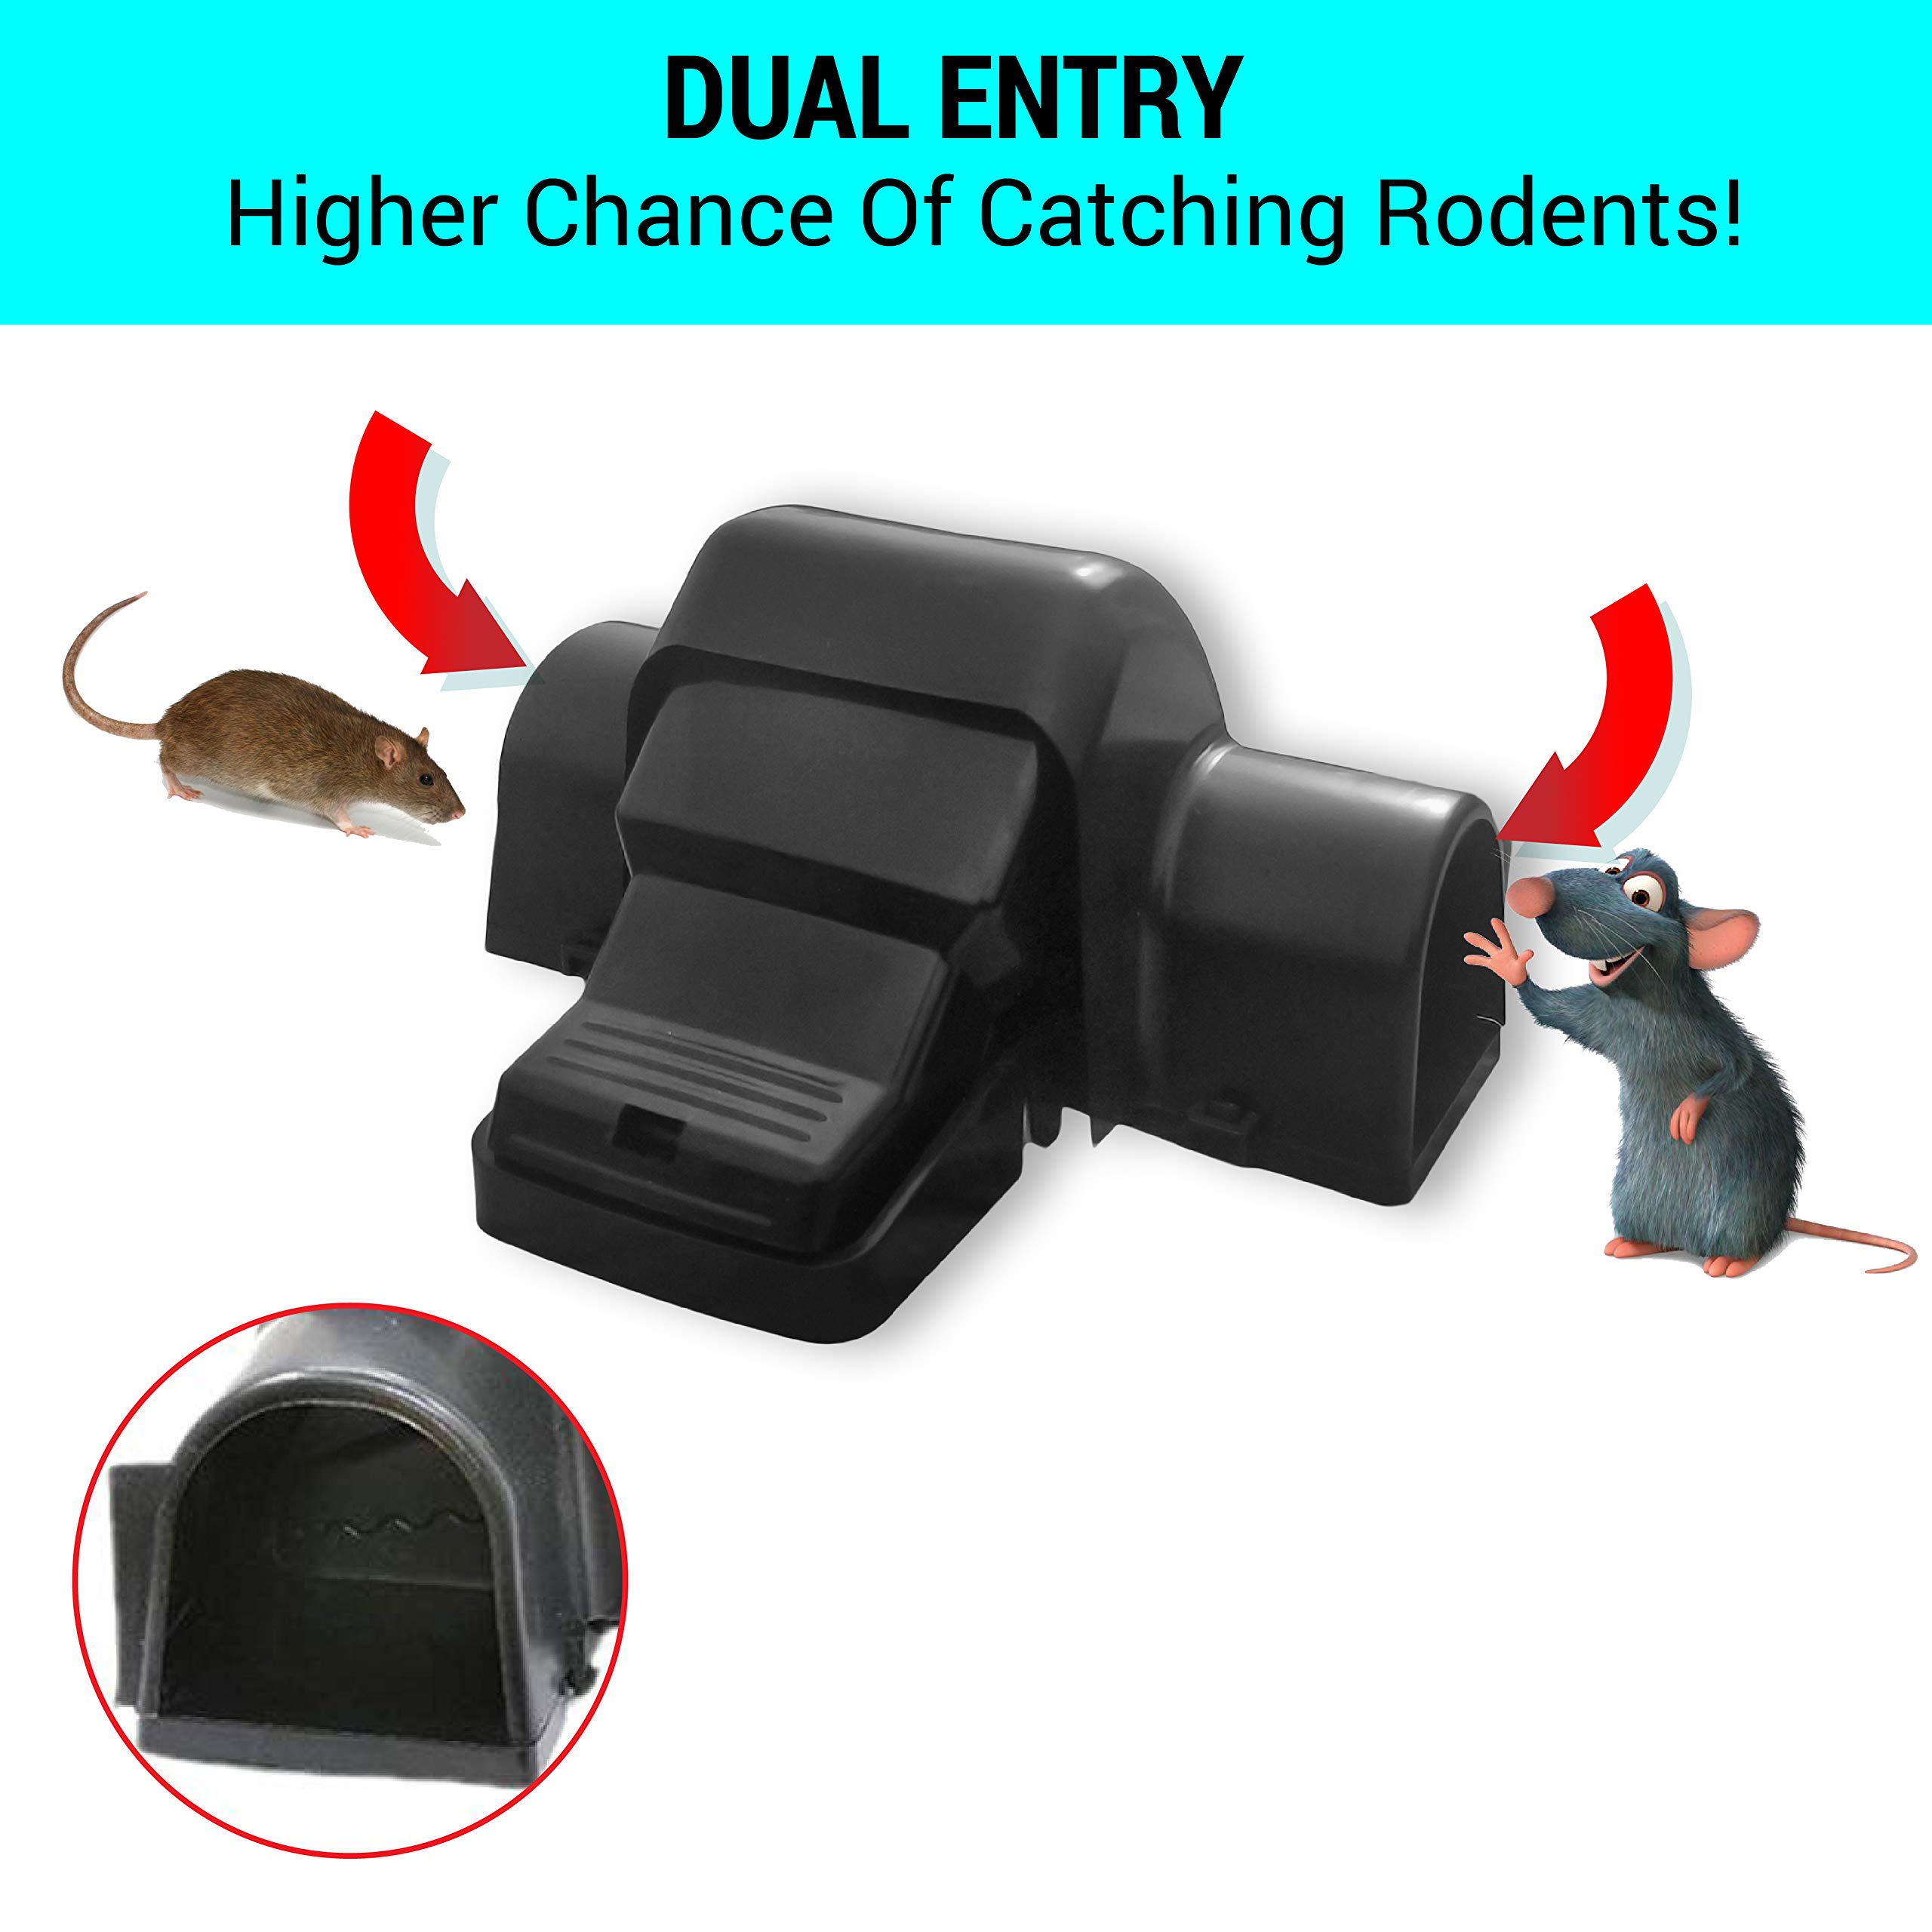 BARLAS Tunneled Safe Pest Control Rat Trap - Humane Dual Entry Traps for Rats and Mice - Rat Snap Traps with Safe Pedal Design - Outdoor Rodent Catcher for Home Office or Restaurants - Pack of 2